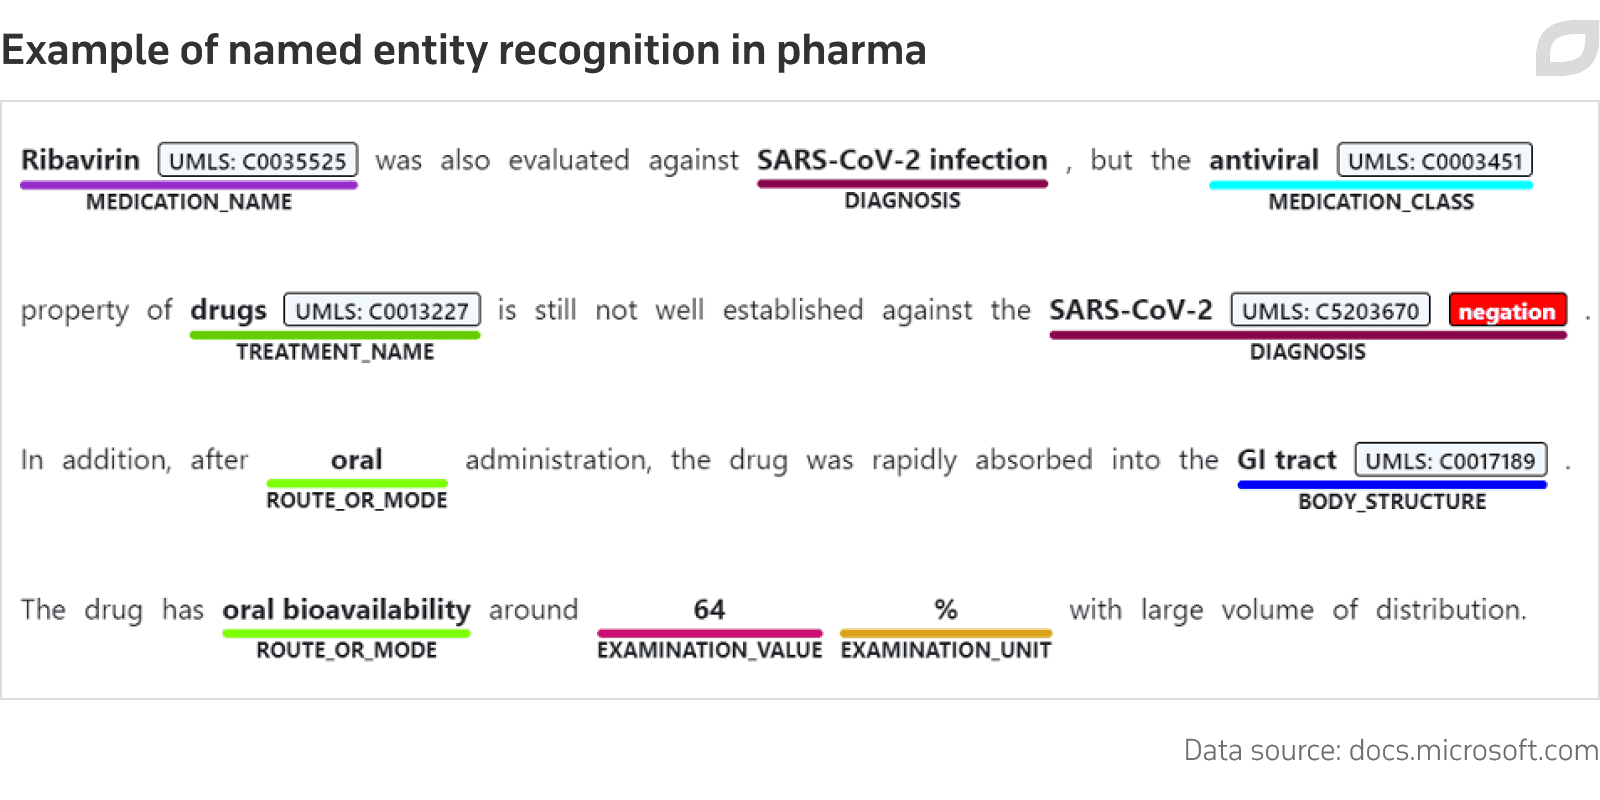 Example of named entity recognition in pharma